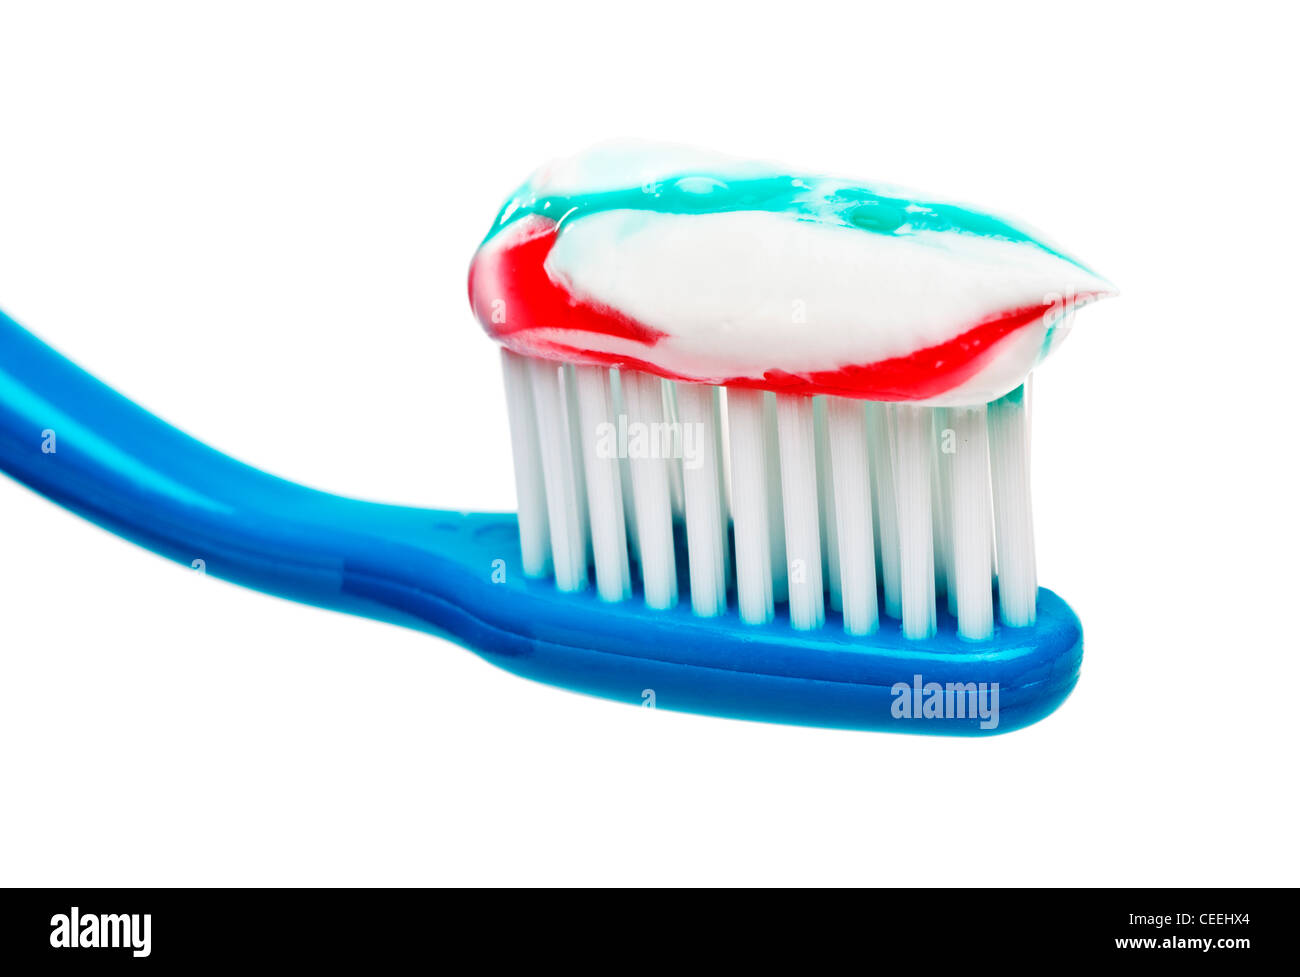 Toothbrush with toothpaste Stock Photo